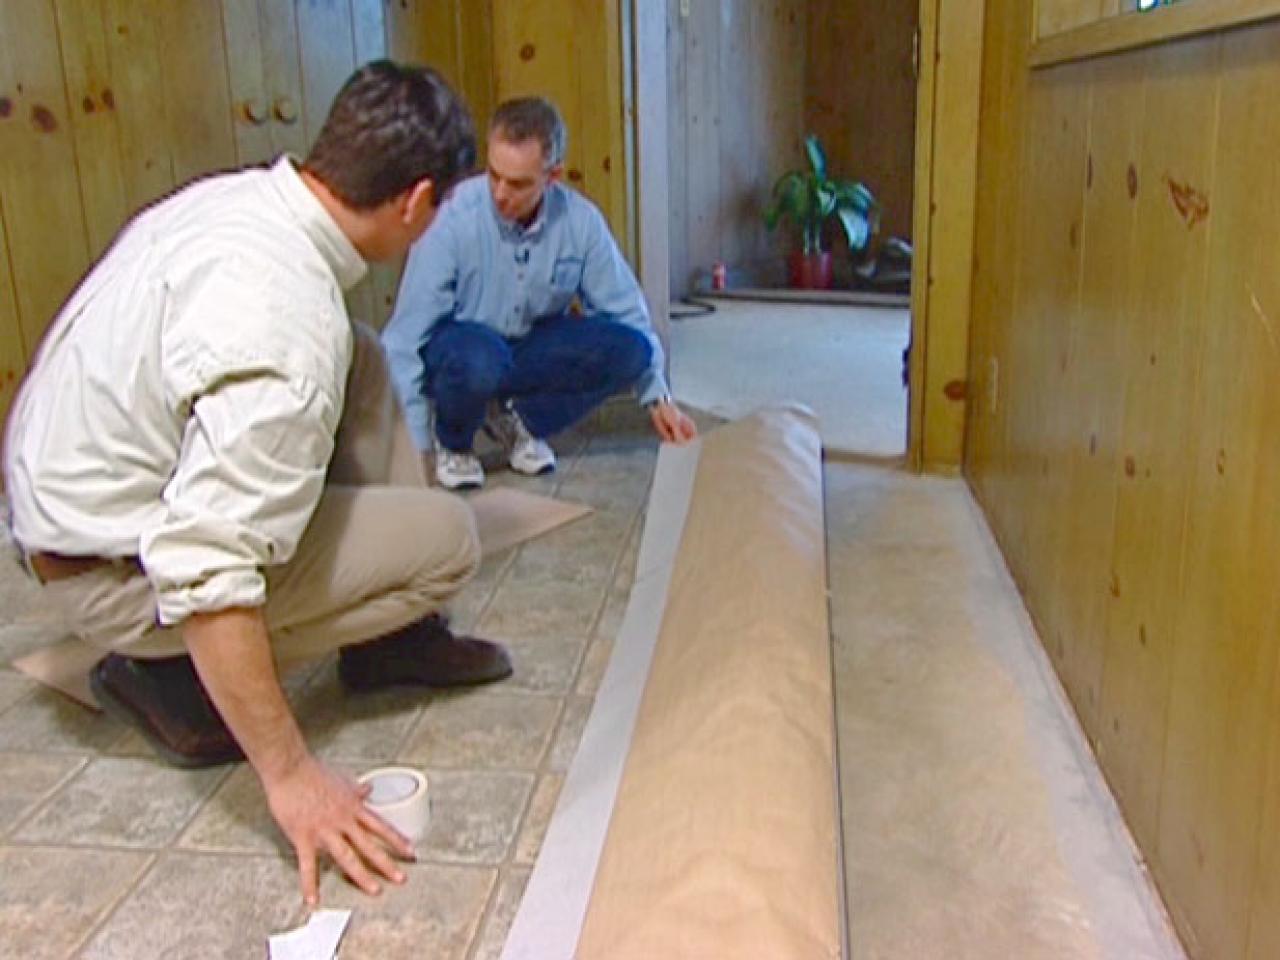 How To Install Vinyl Flooring Tos, What Do You Lay Under Vinyl Flooring